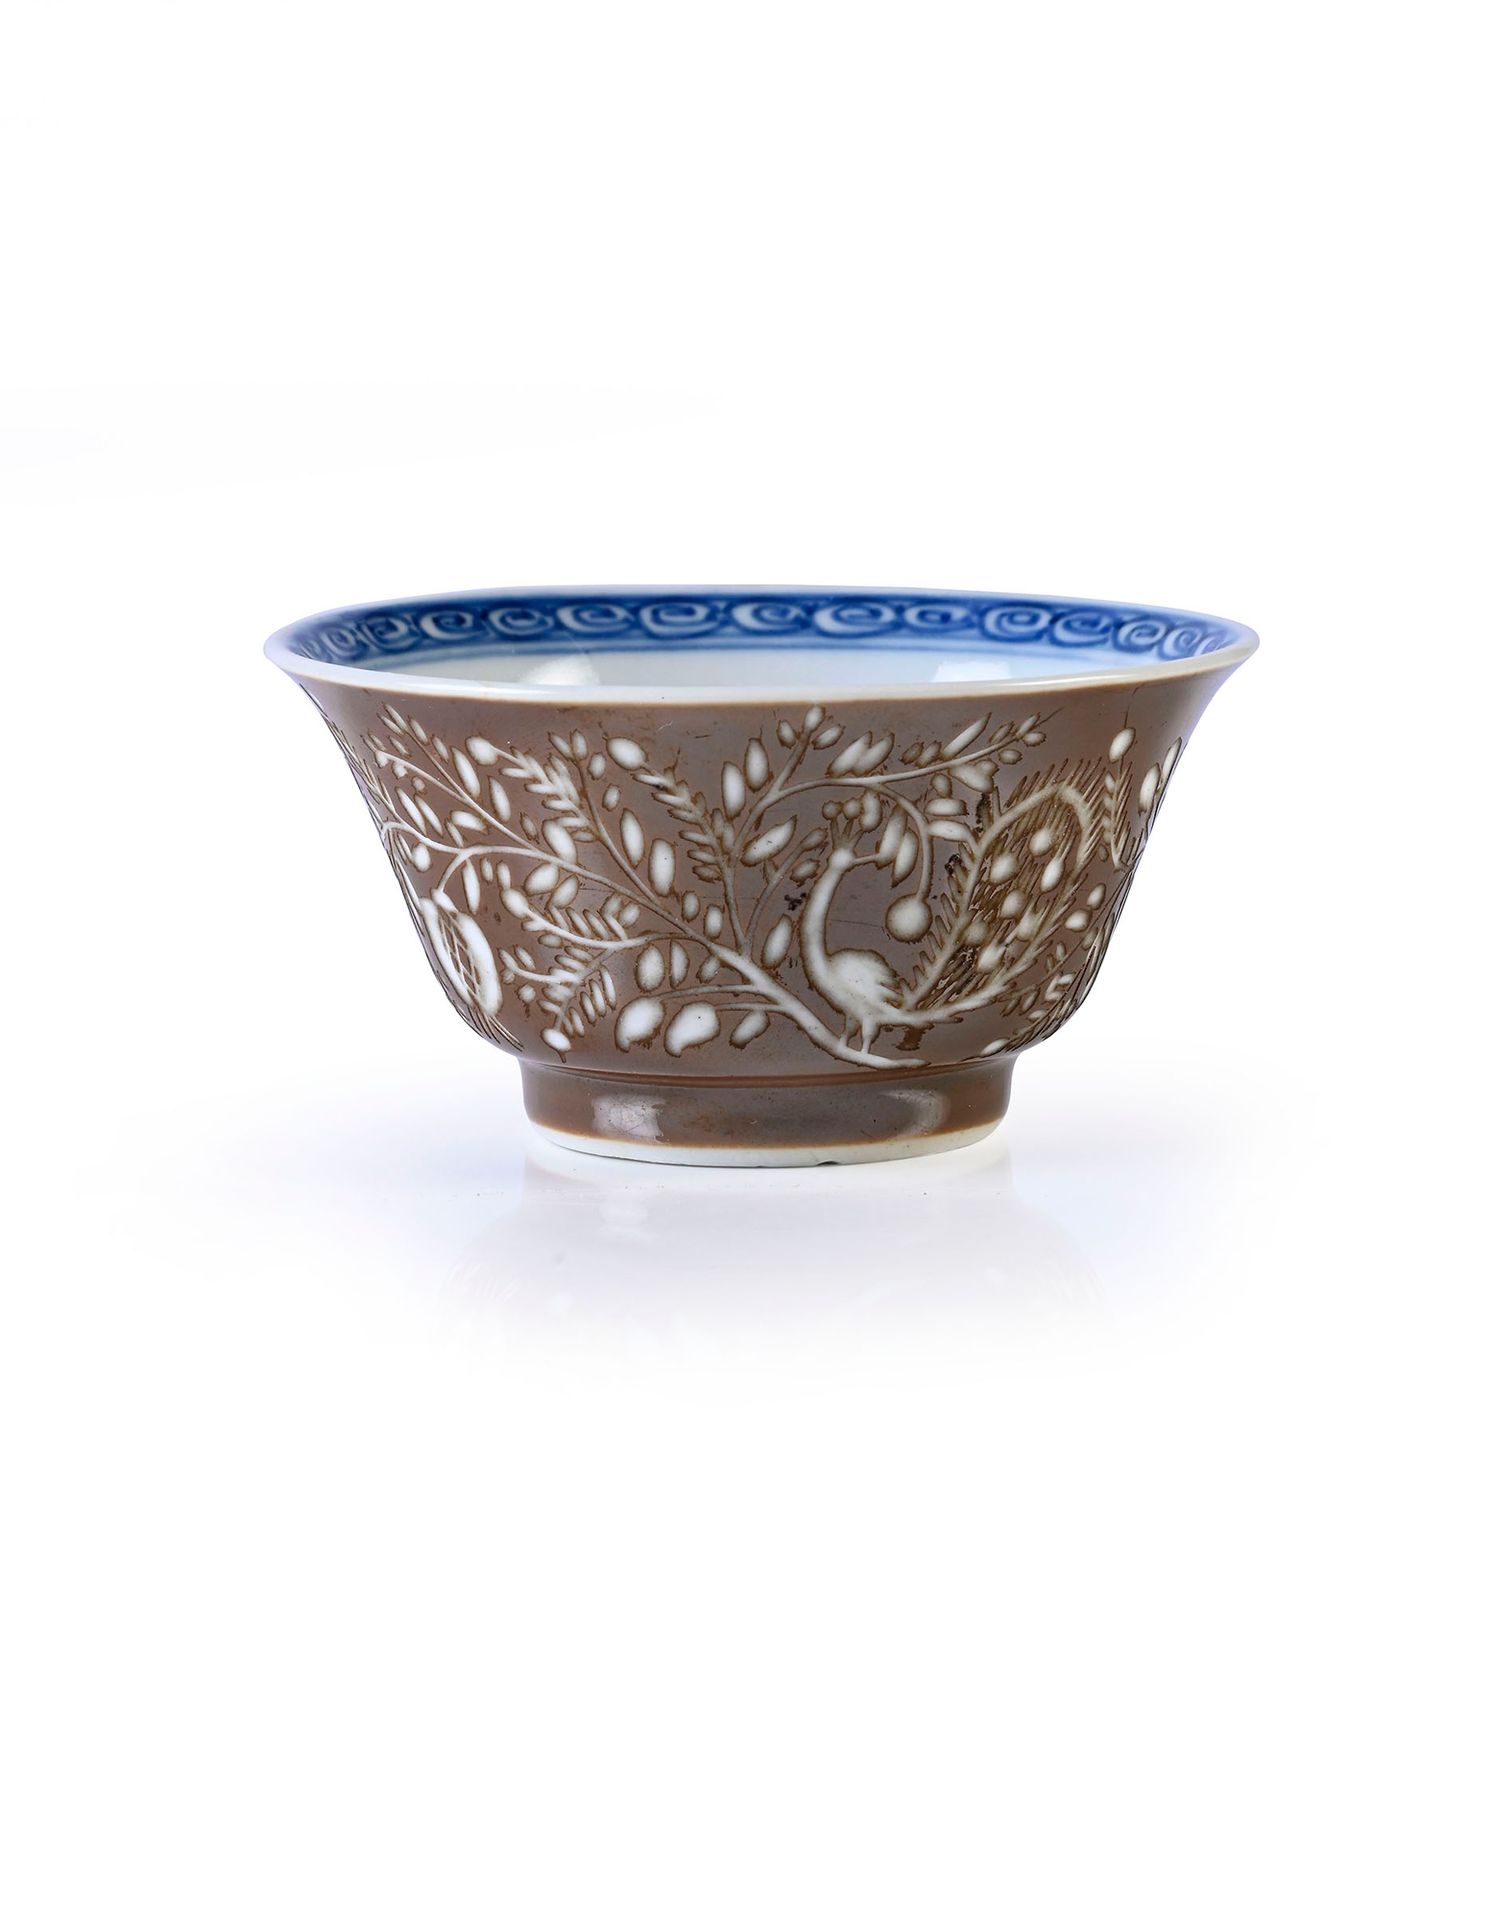 CHINE, Epoque Kangxi, XVIIIe siècle* Small porcelain bowl
Mounted on a foot, wit&hellip;